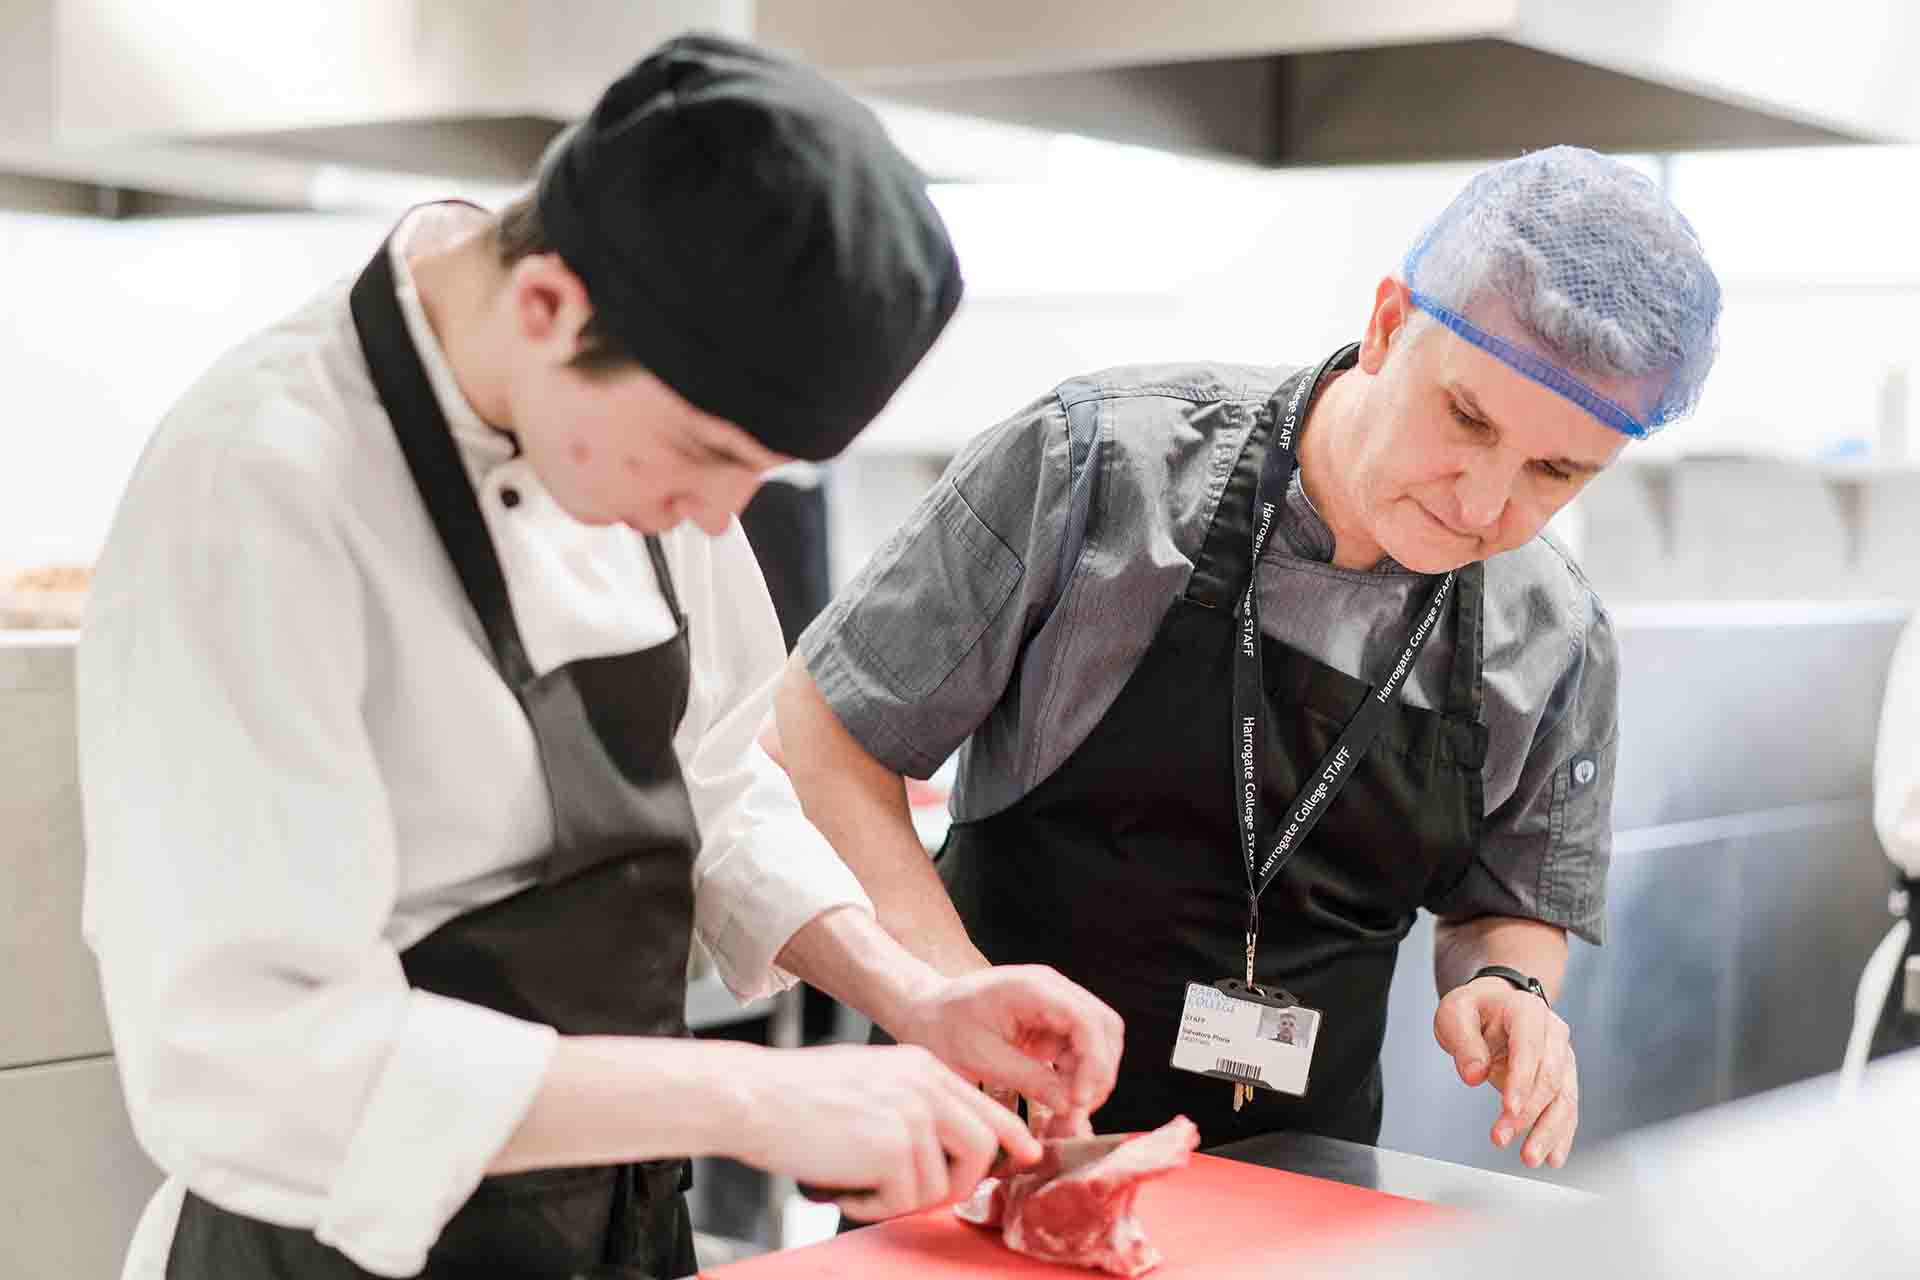 Mature catering supervisor in grey shirt, wearing hair net and black apron assisting a male student wearing kitchen uniform and black apron, in cutting a piece of meat in the kitchen